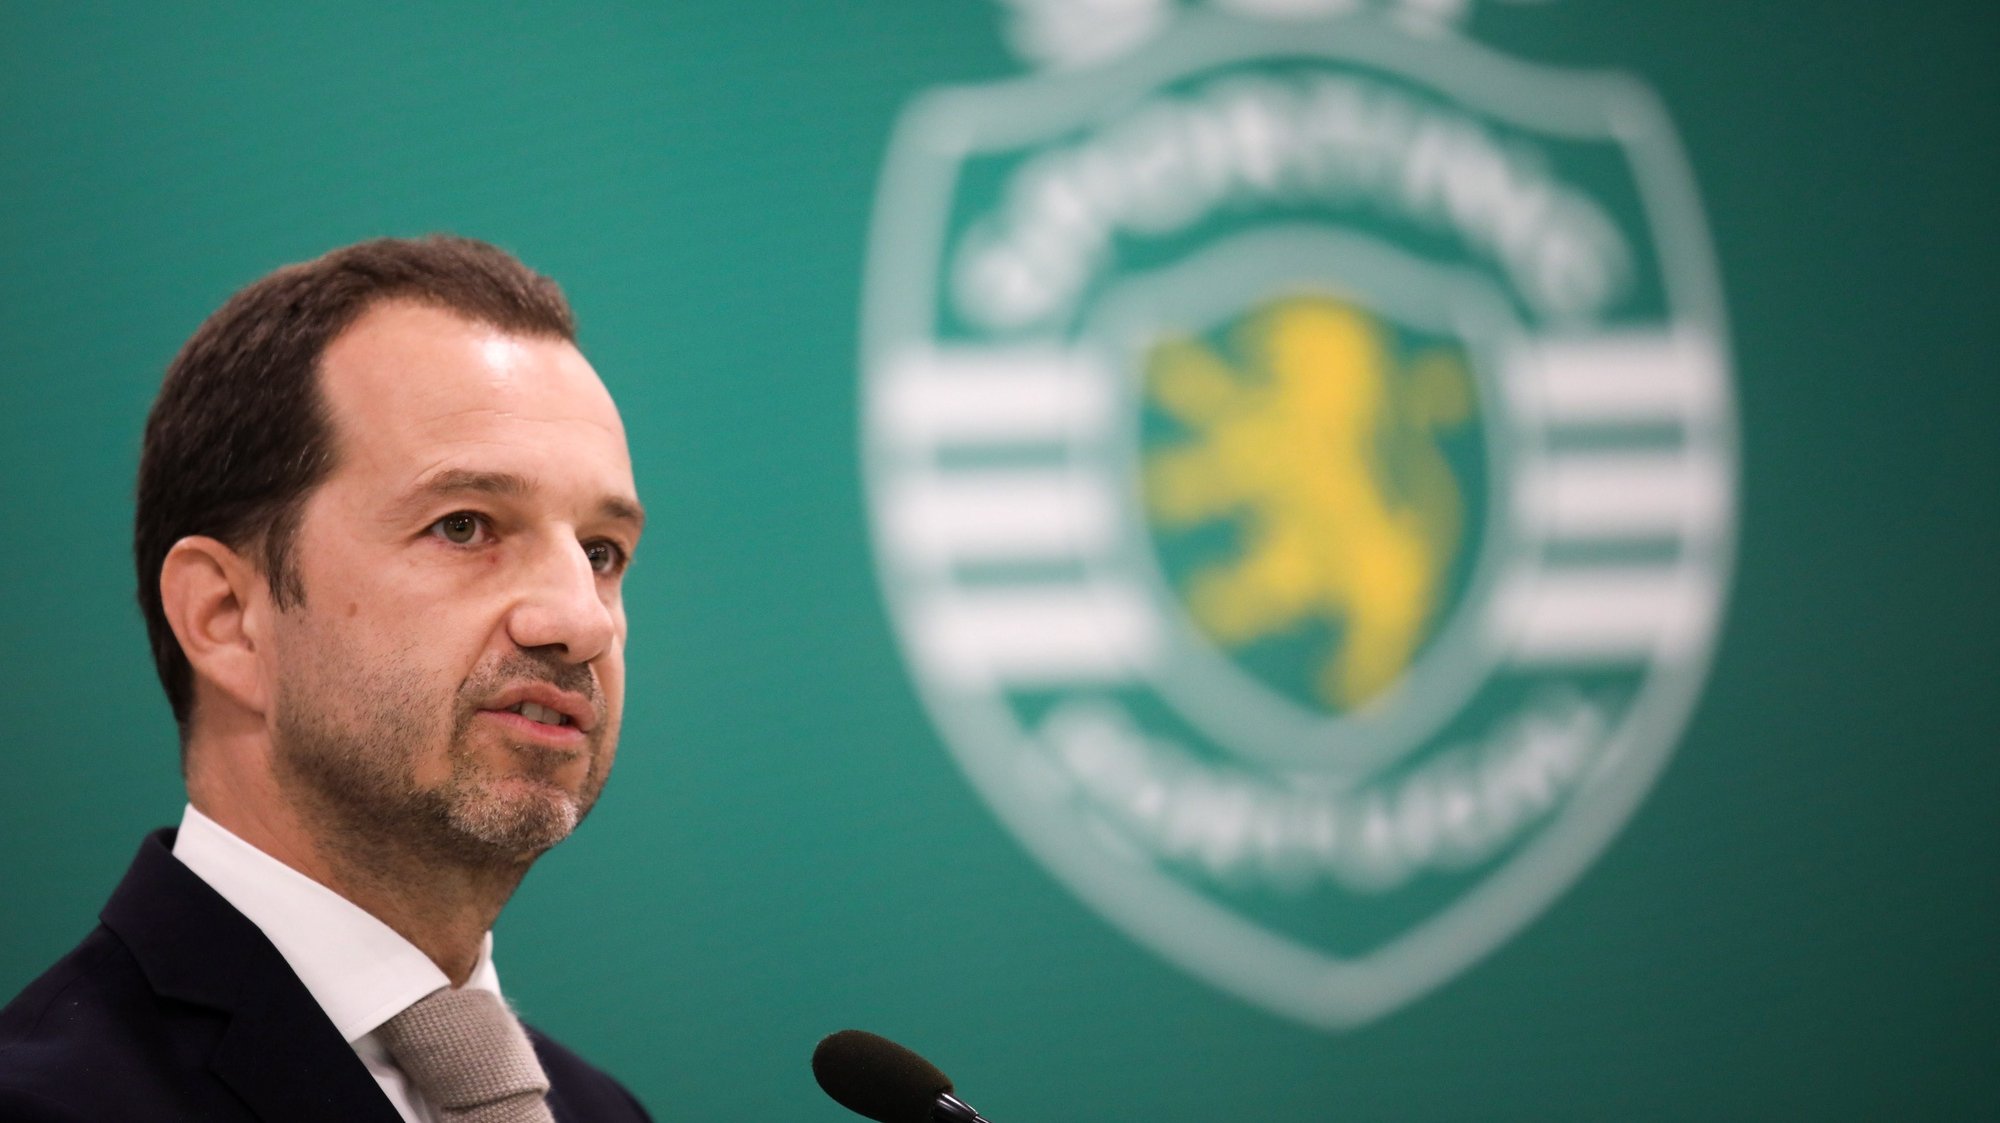 epa08272502 Sporting CP president Frederico Varandas speaks during the presentation of Sporting&#039;s new coach Ruben Amorim (unseen) at Alvalade stadium in Lisbon, Portugal, 05 March 2020. The 35-year-old Amorin came from Braga.  EPA/ANDRE KOSTERS